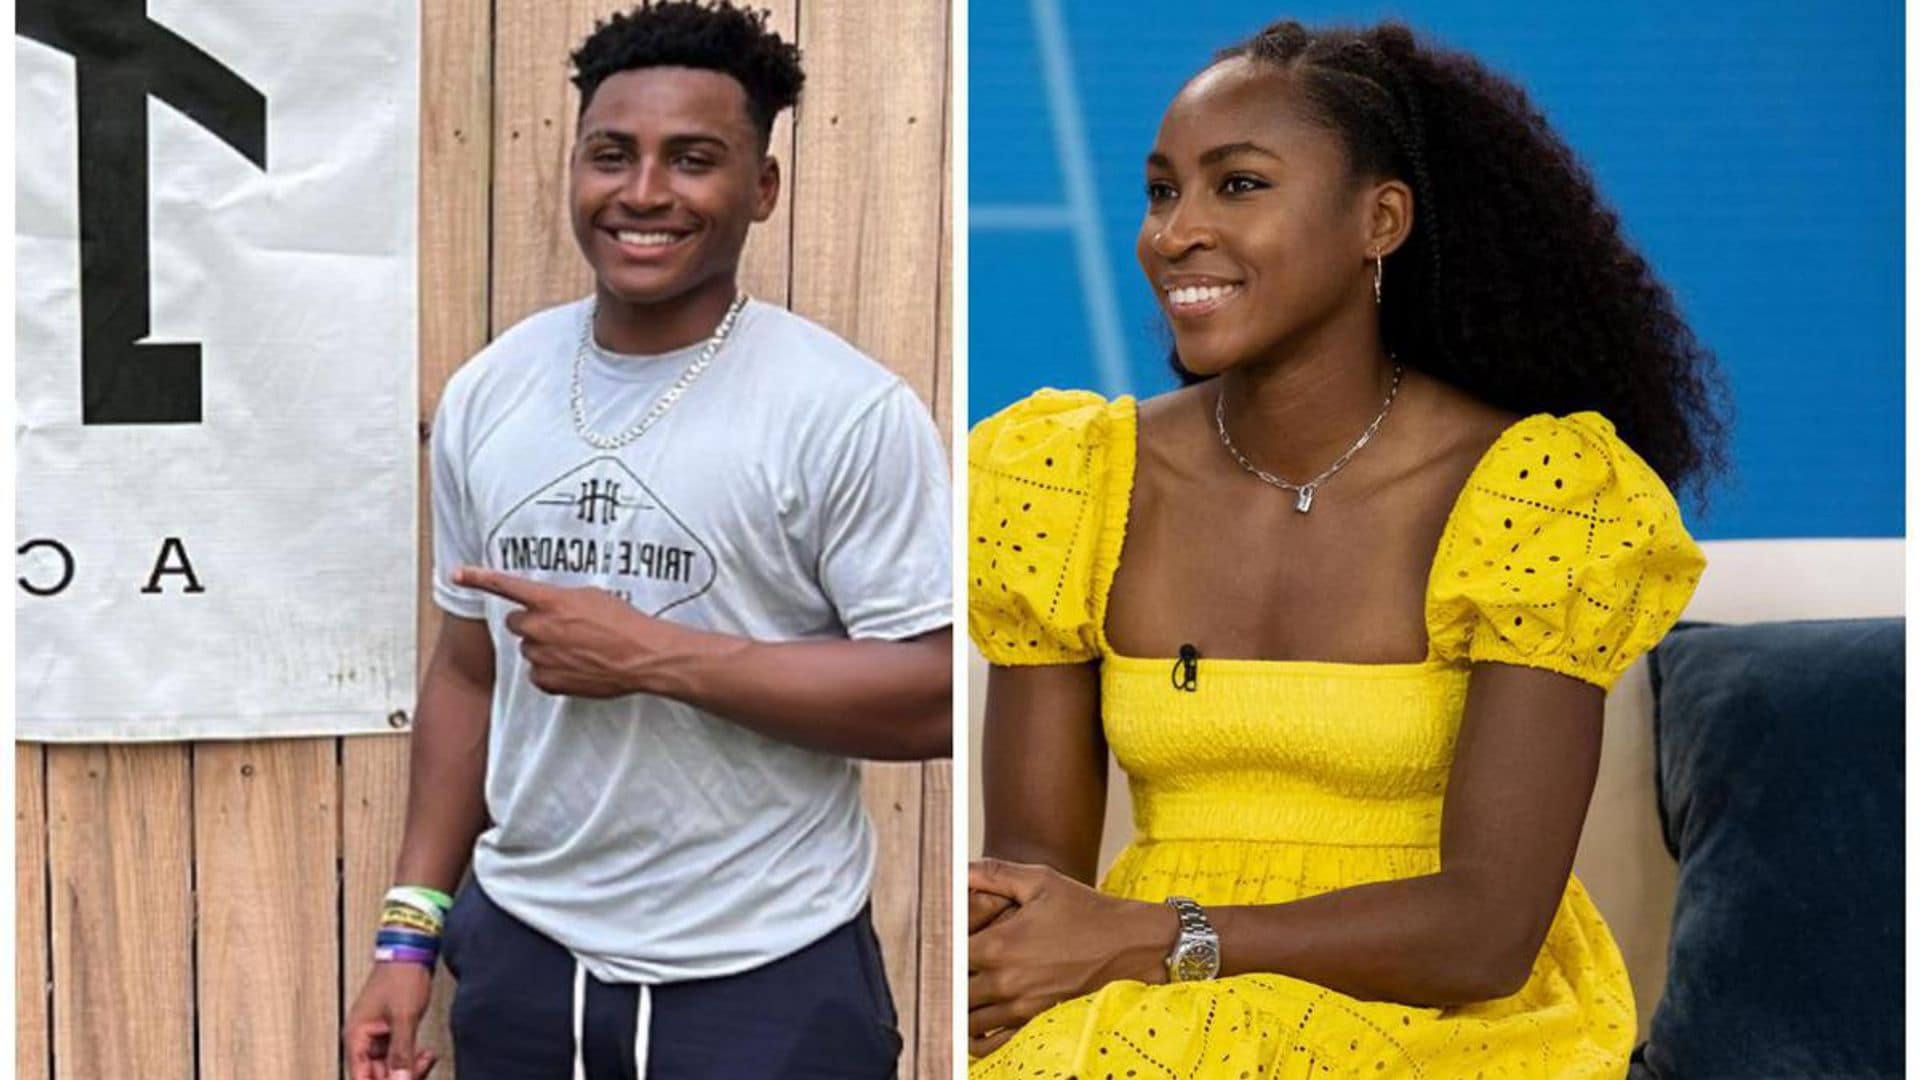 Coco Gauff celebrates her little brother’s birthday with sweet tribute: ‘My biggest cheerleader’